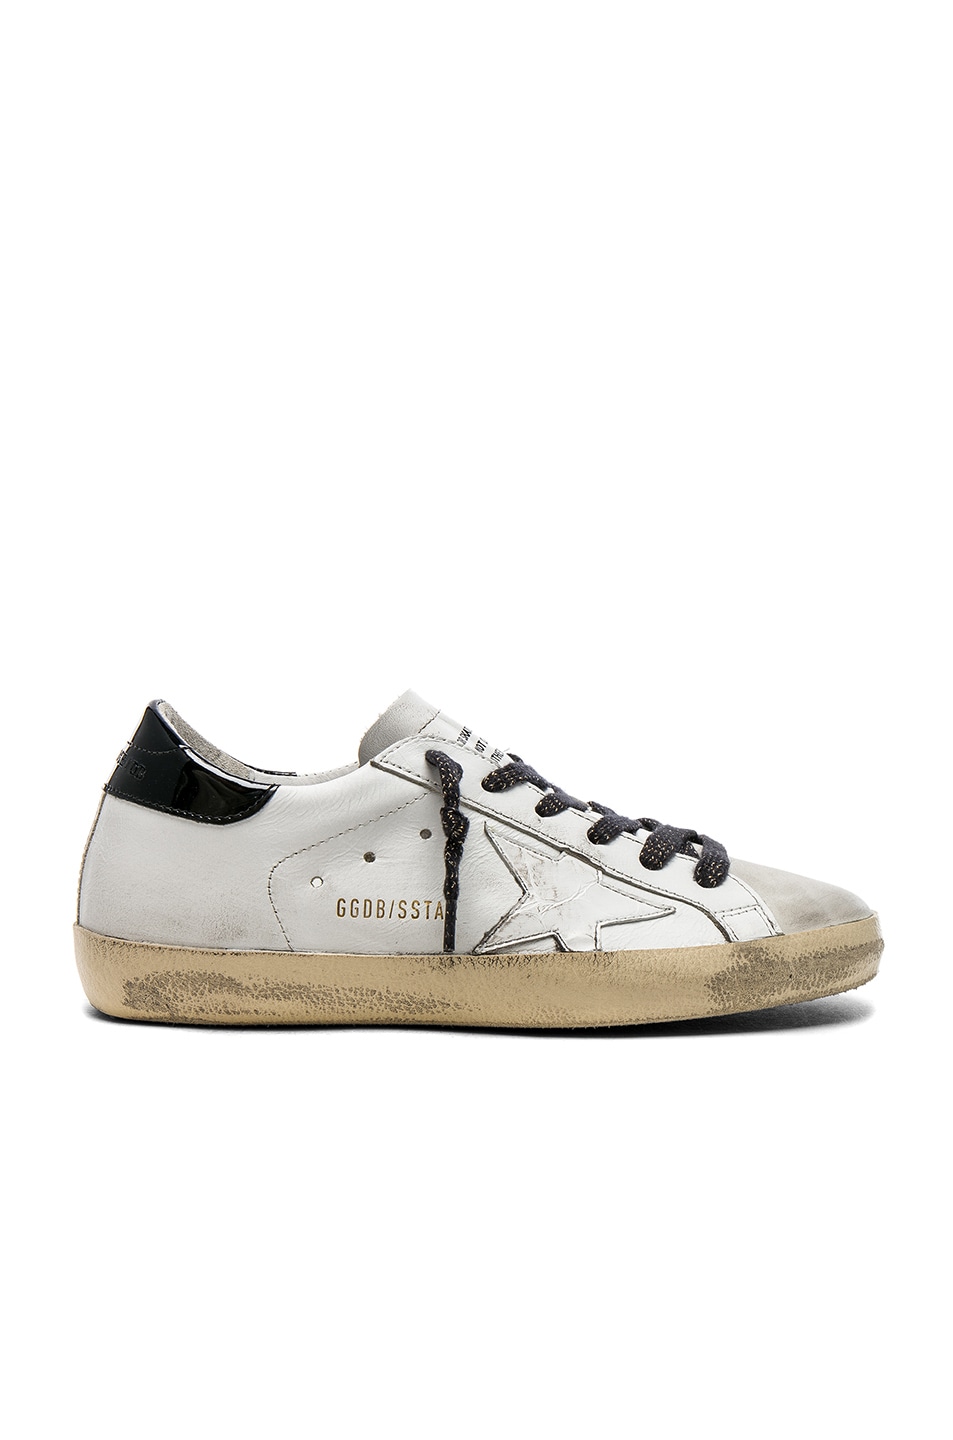 Image 1 of Golden Goose Leather Superstar Sneakers in White & Croc Star